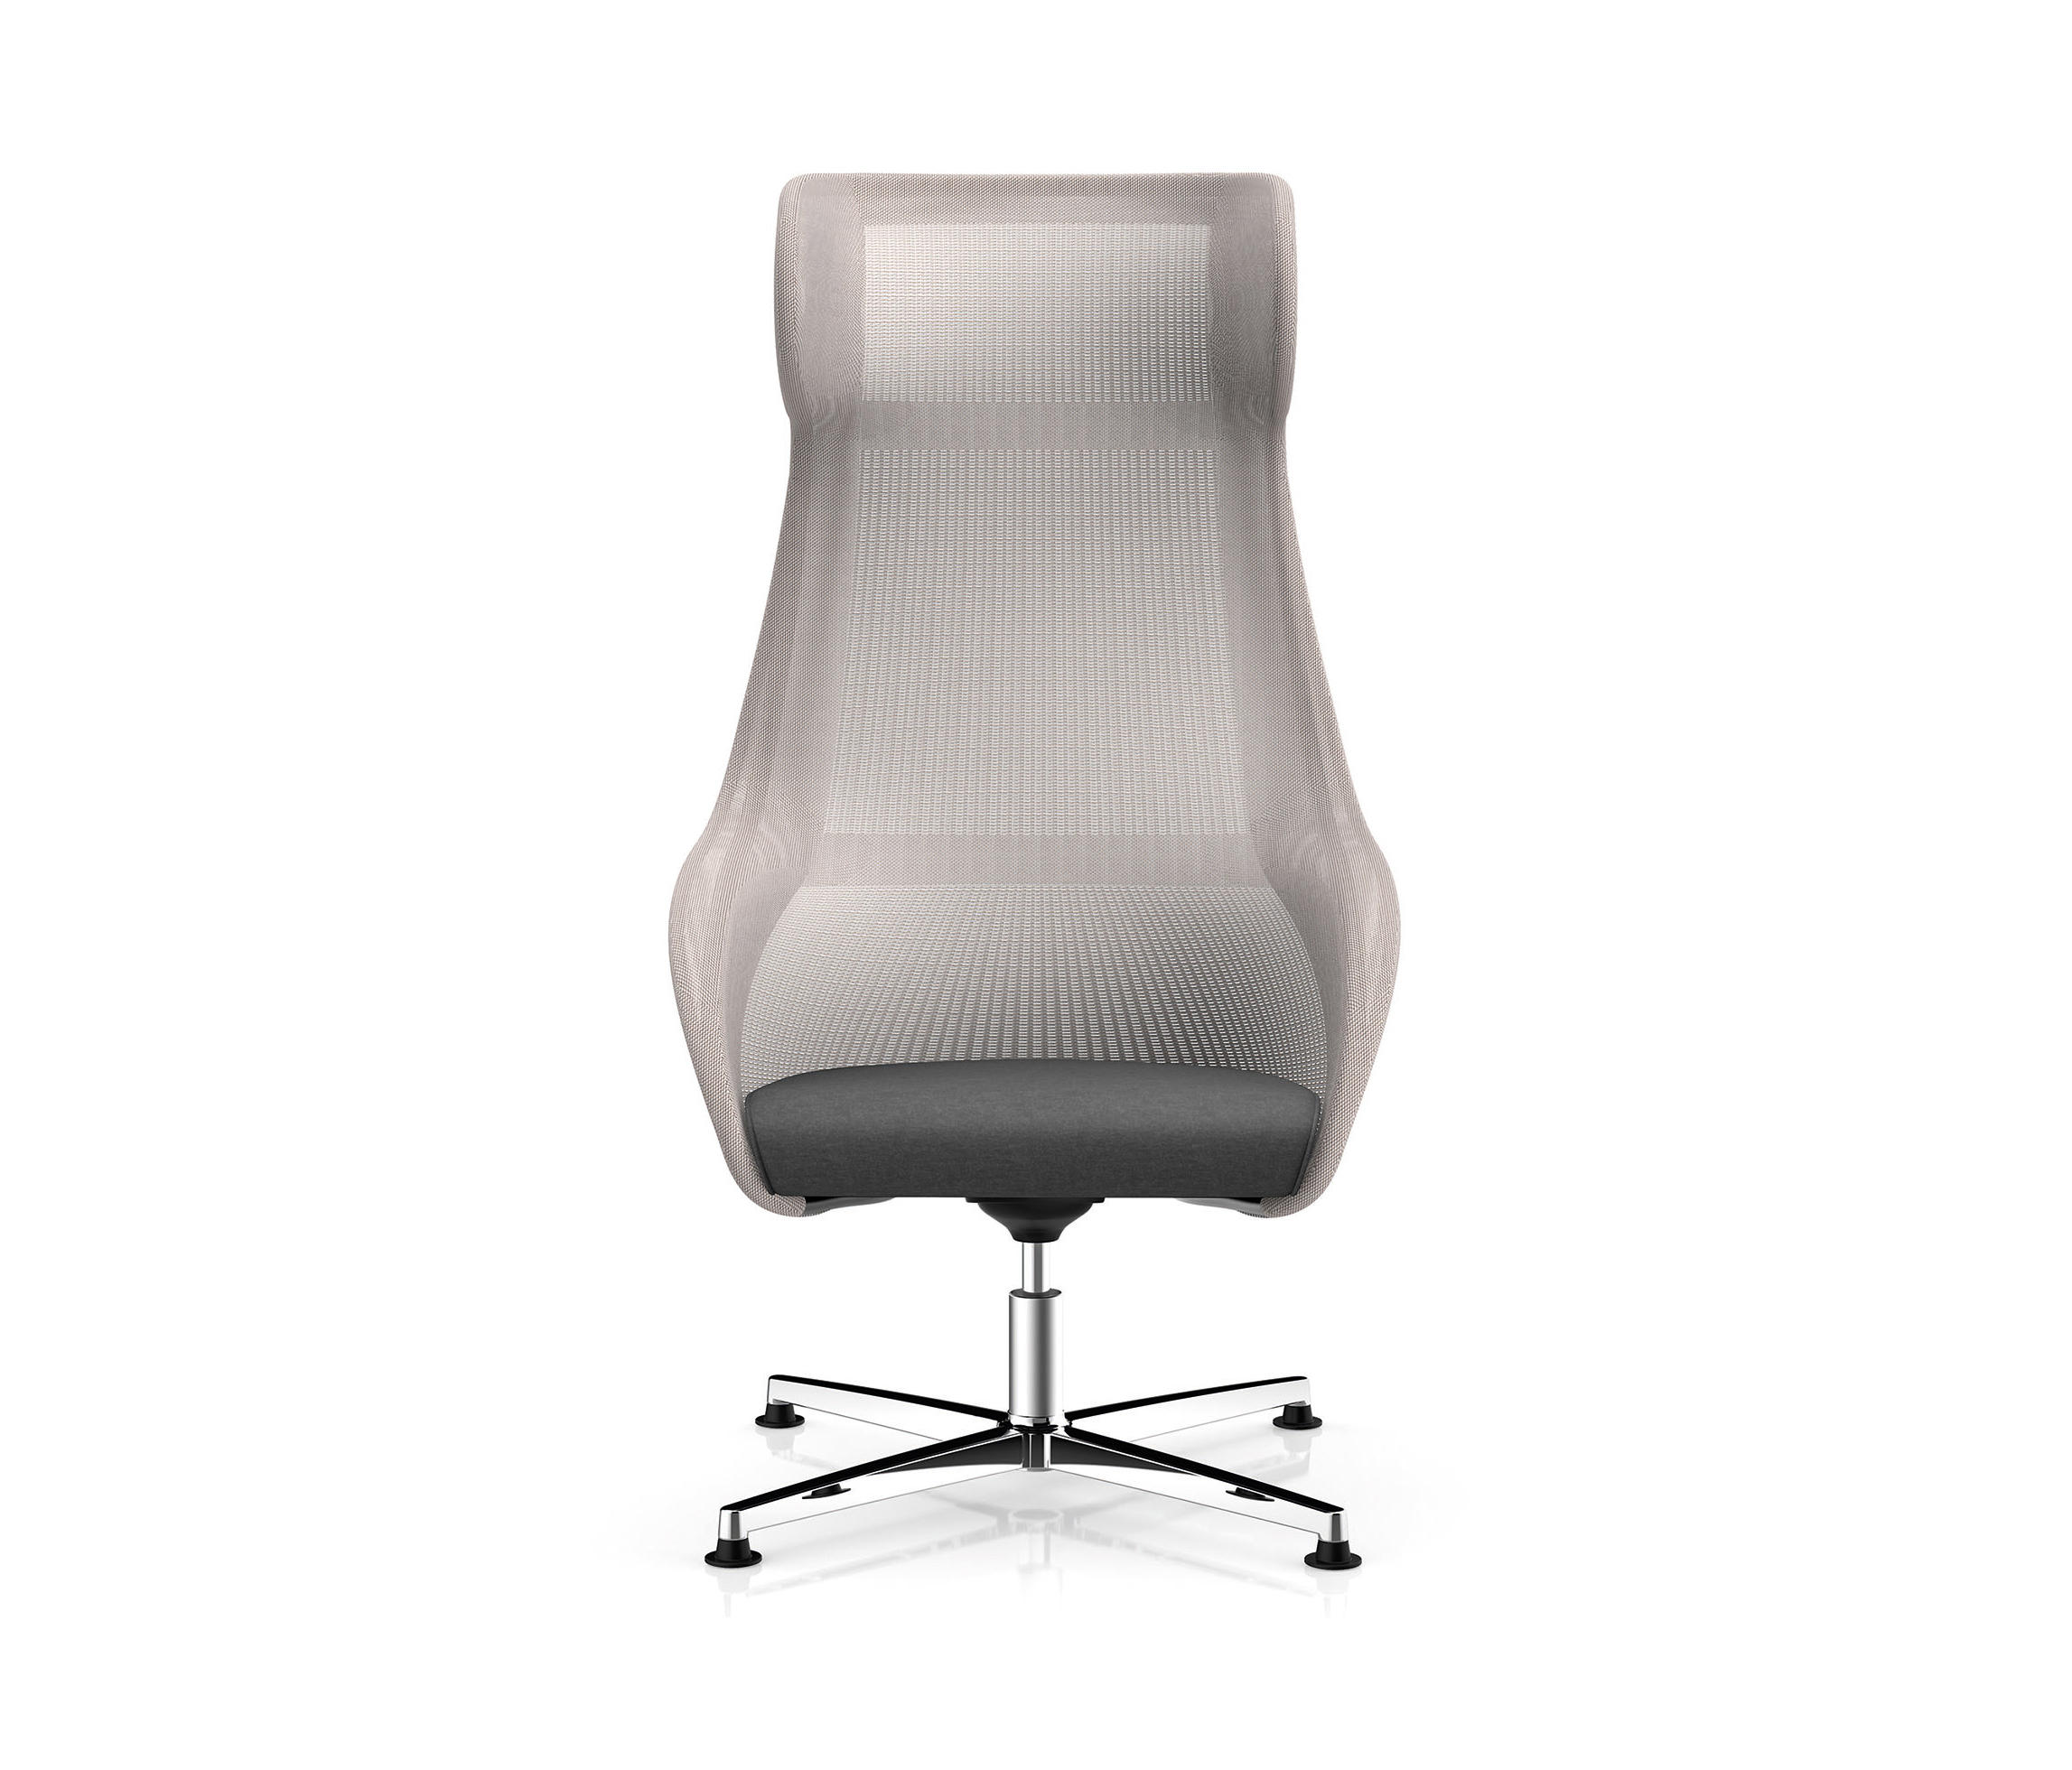 OASIS - Conference chairs from Mobica+ | Architonic